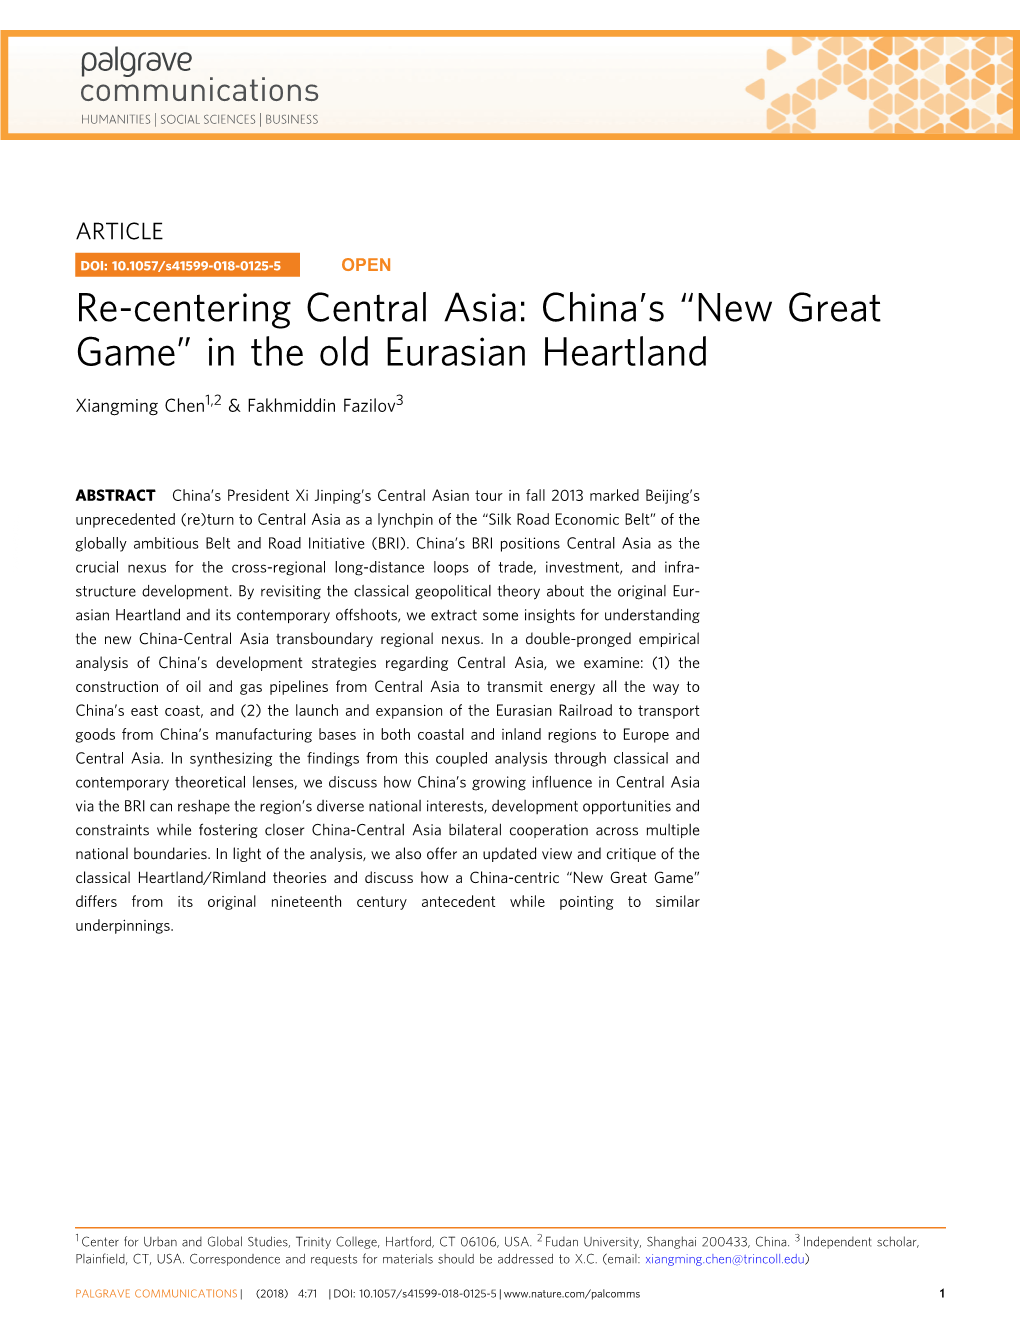 Re-Centering Central Asia: China's “New Great Game”